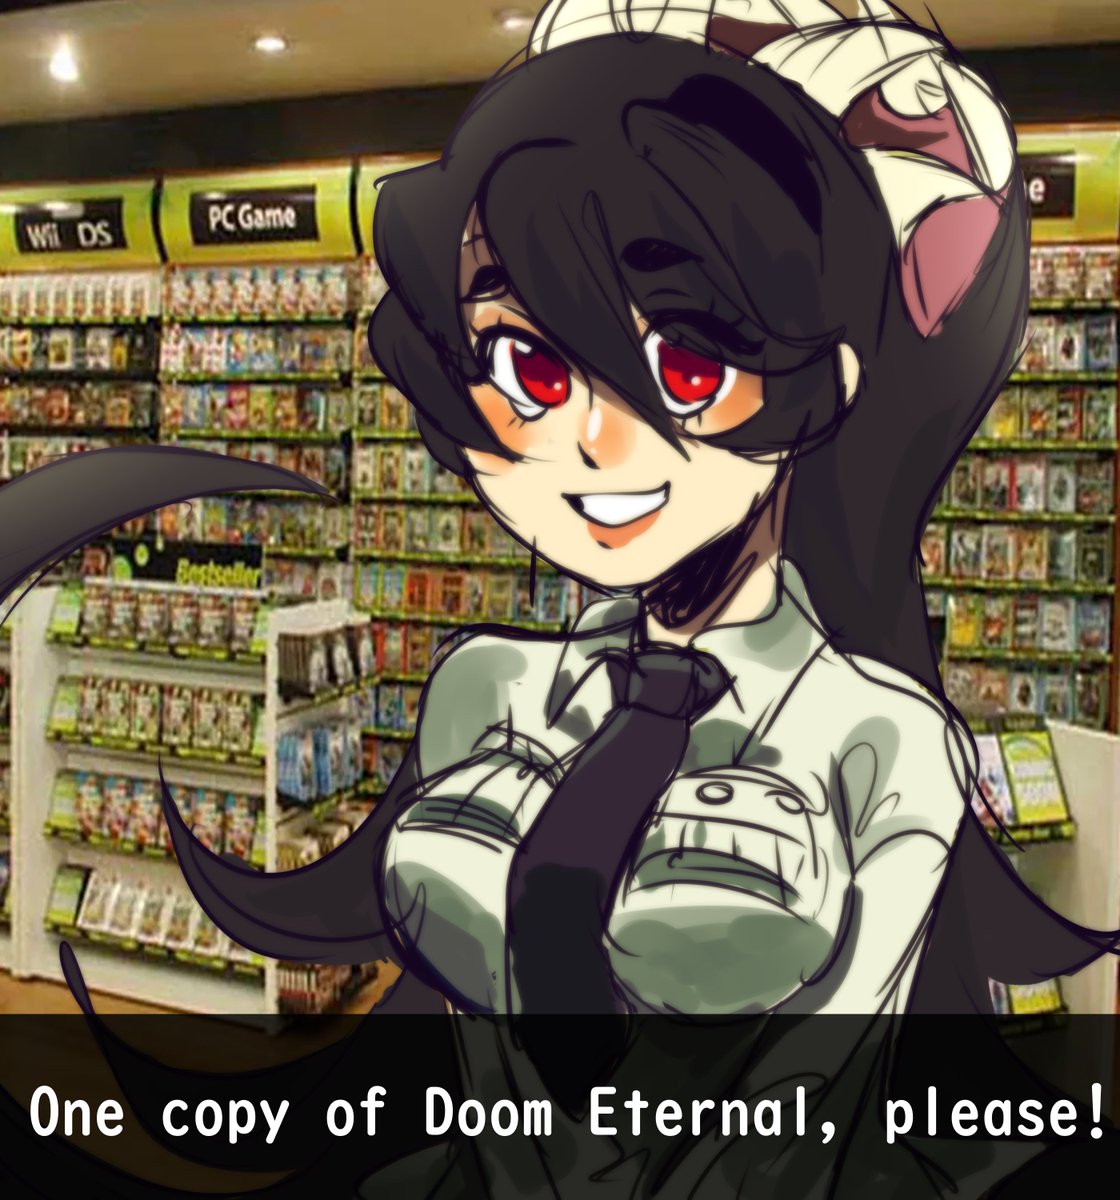 Filia ordering a copy of Doom Eternal at a video game store.